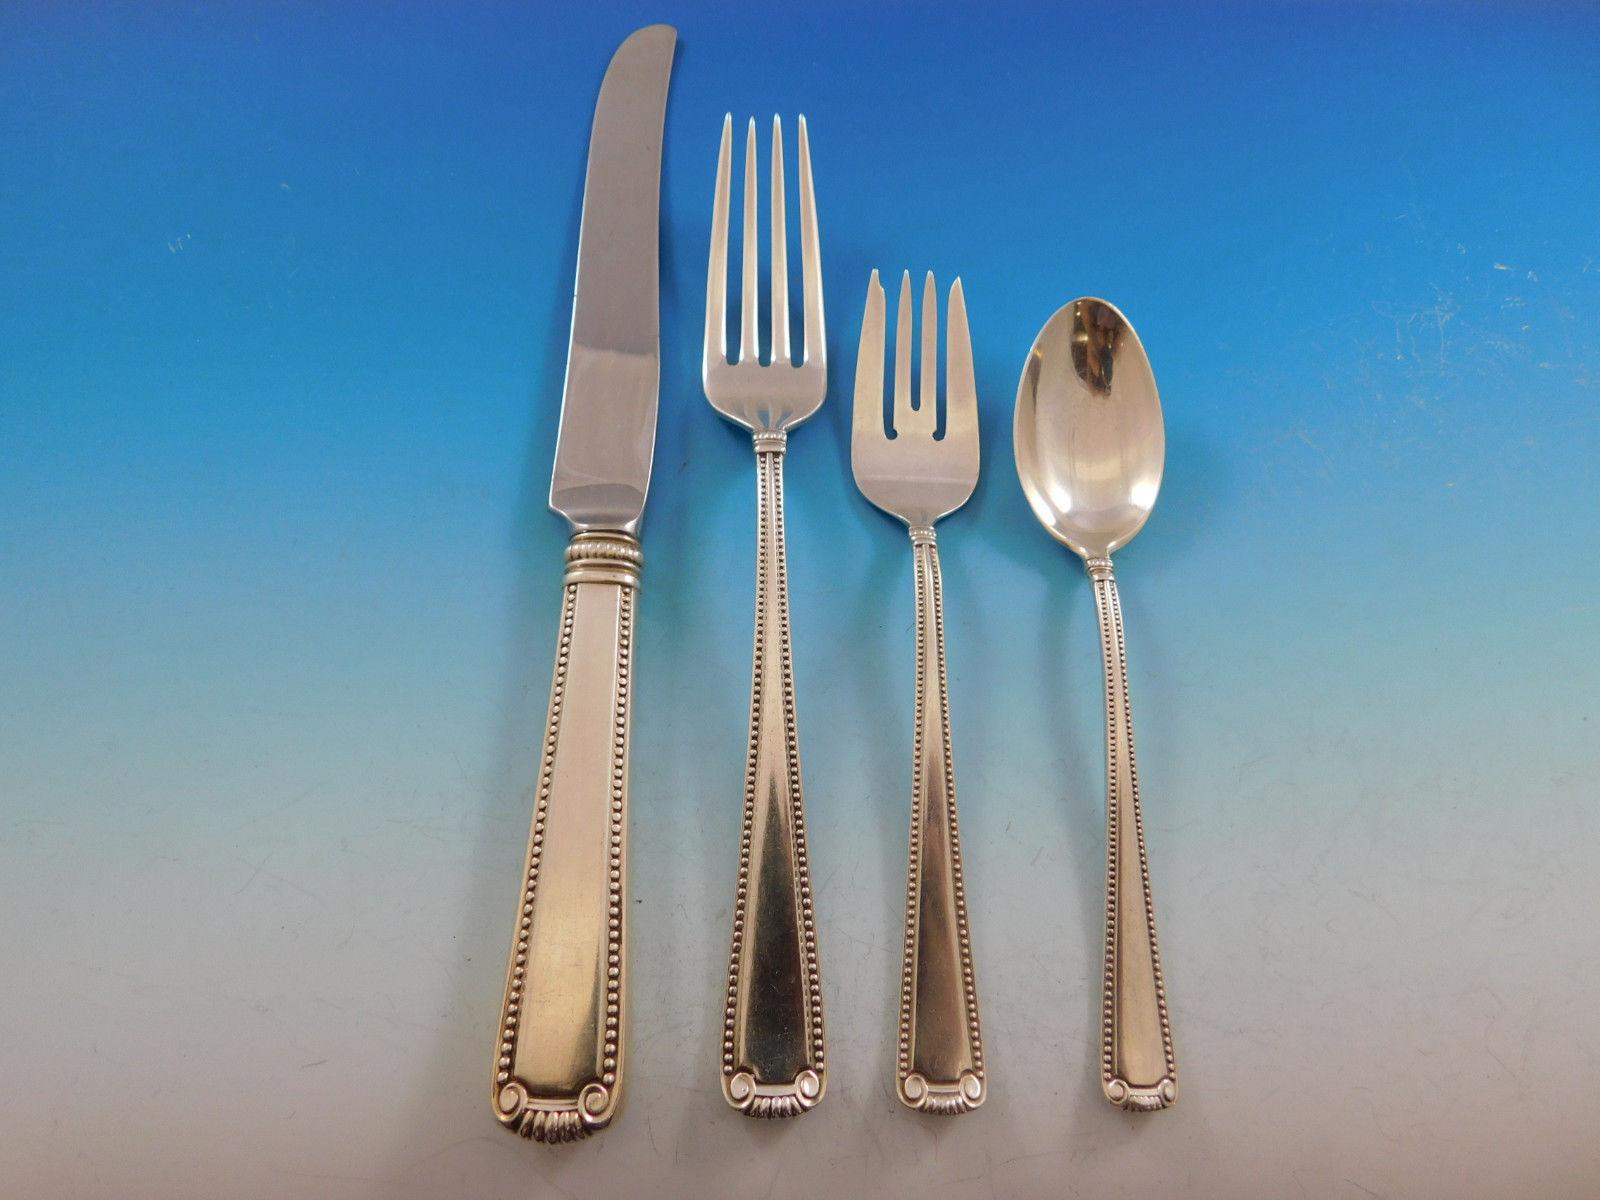 Outstanding dinner size scroll and bead Blackinton sterling silver flatware set - 82 pieces. This set includes:

12 dinner size knives, 9 5/8